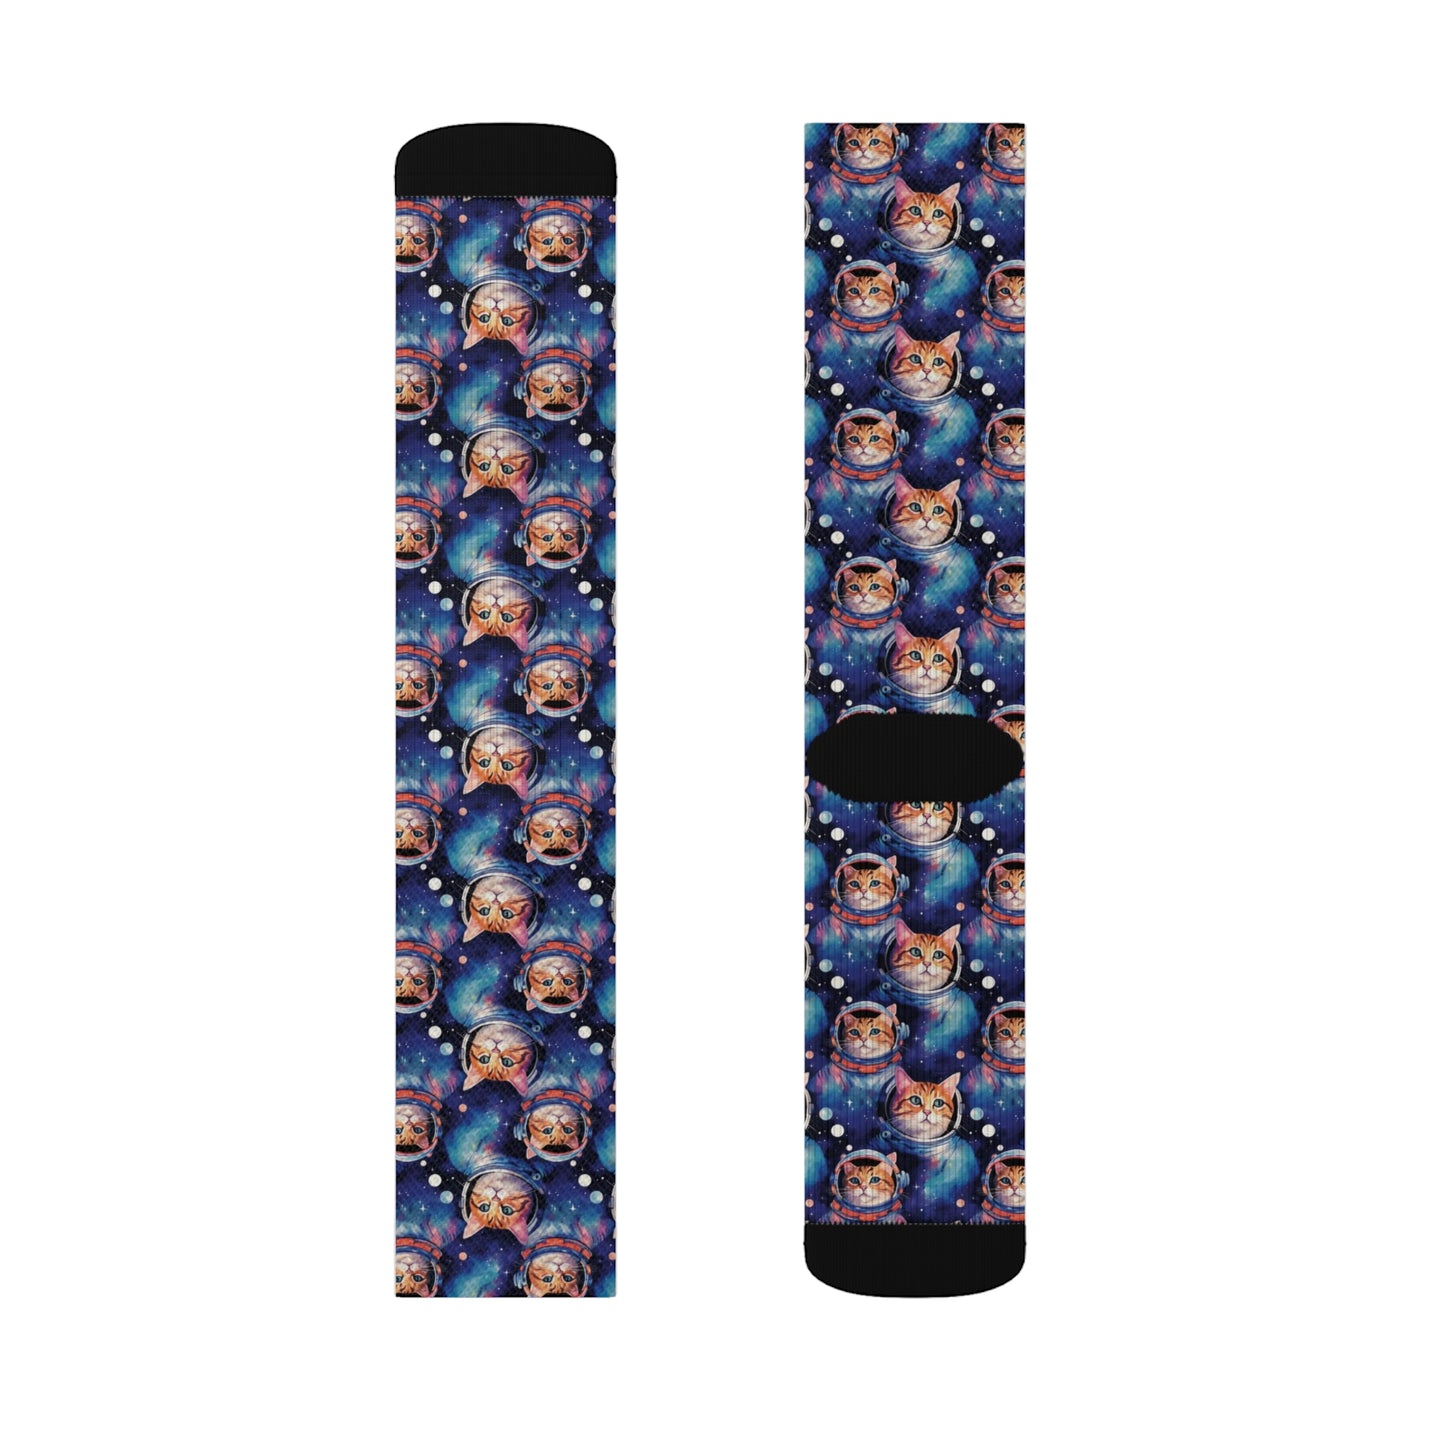 Cats in Space Socks, Astronaut Crew Sublimation Women Men Designer Fun Novelty Cool Funky Crazy Casual Cute Unique Dress